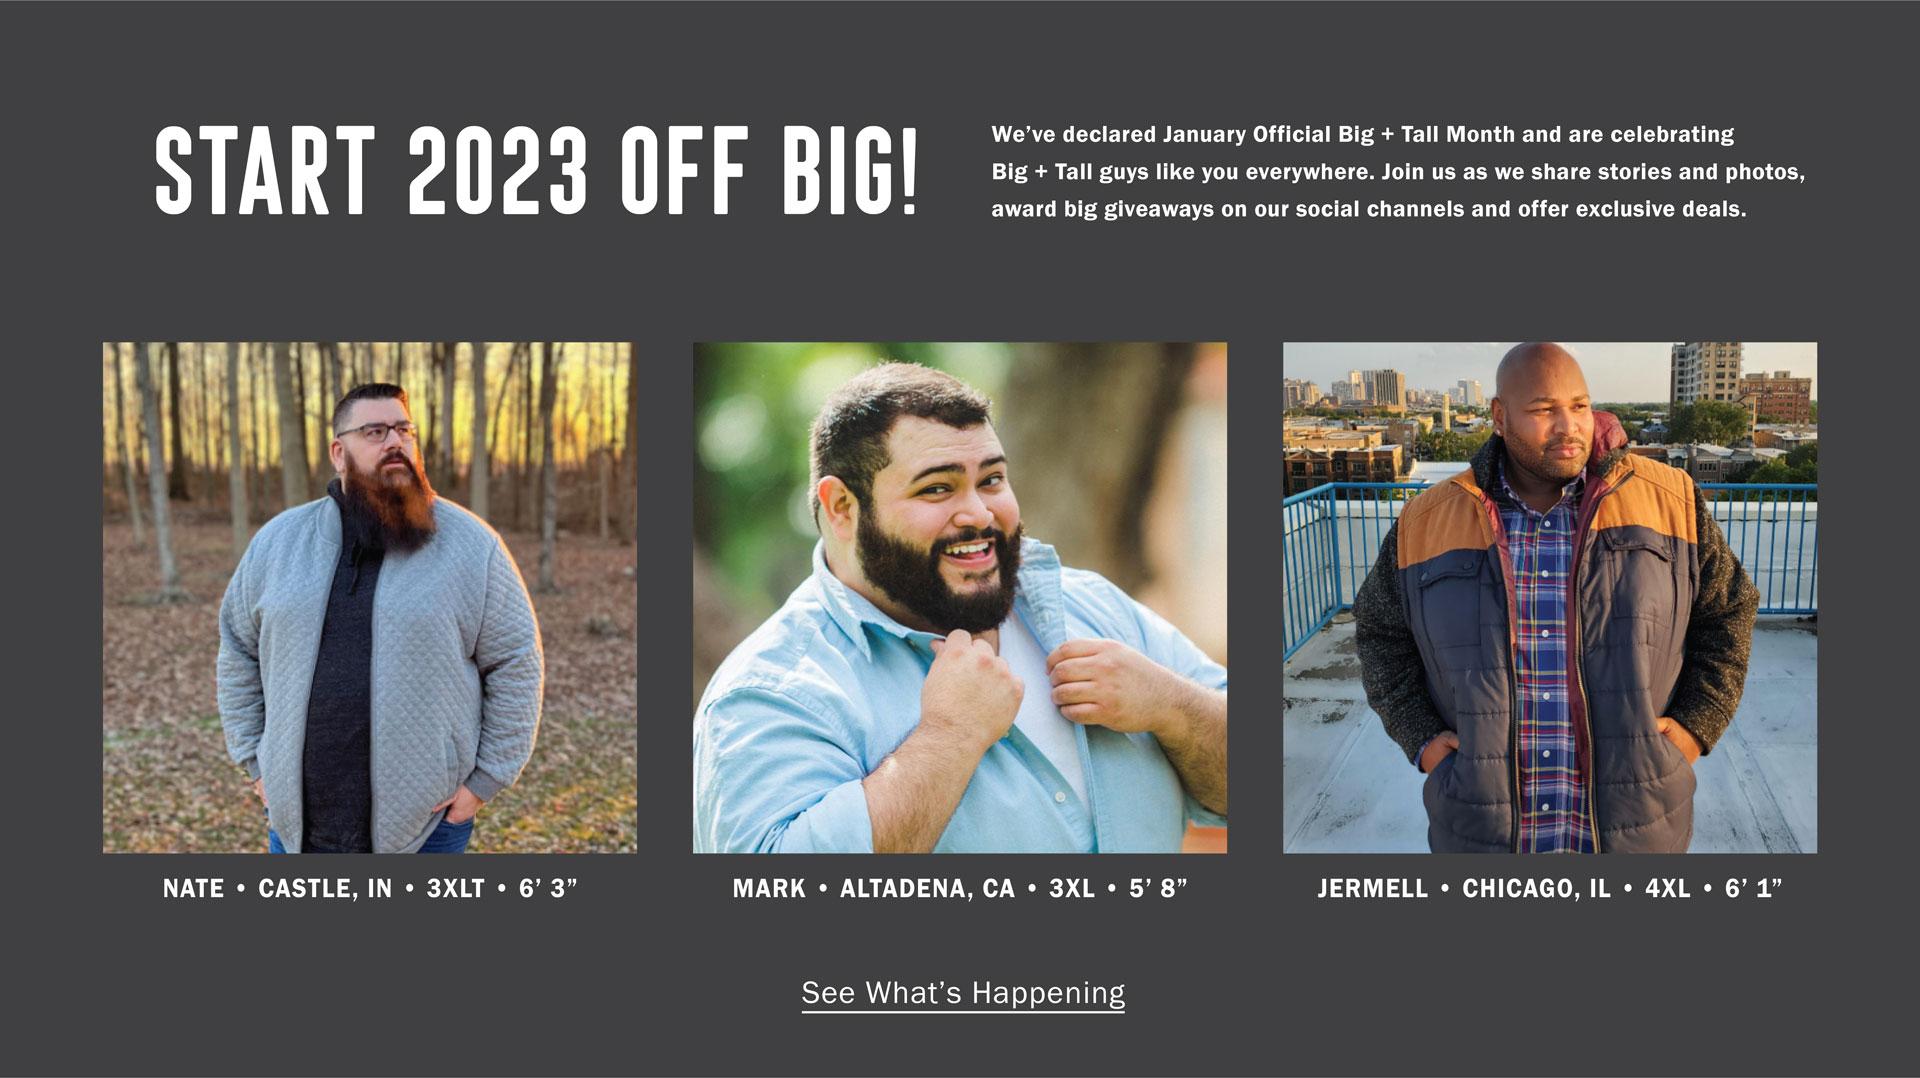 start 2023 off BIG! | We’ve declared January Official Big + Tall Month and are celebrating Big + Tall guys like you everywhere. Join us as we share stories and photos, award big giveaways on our social channels and offer exclusive deals. | See What’s Happening